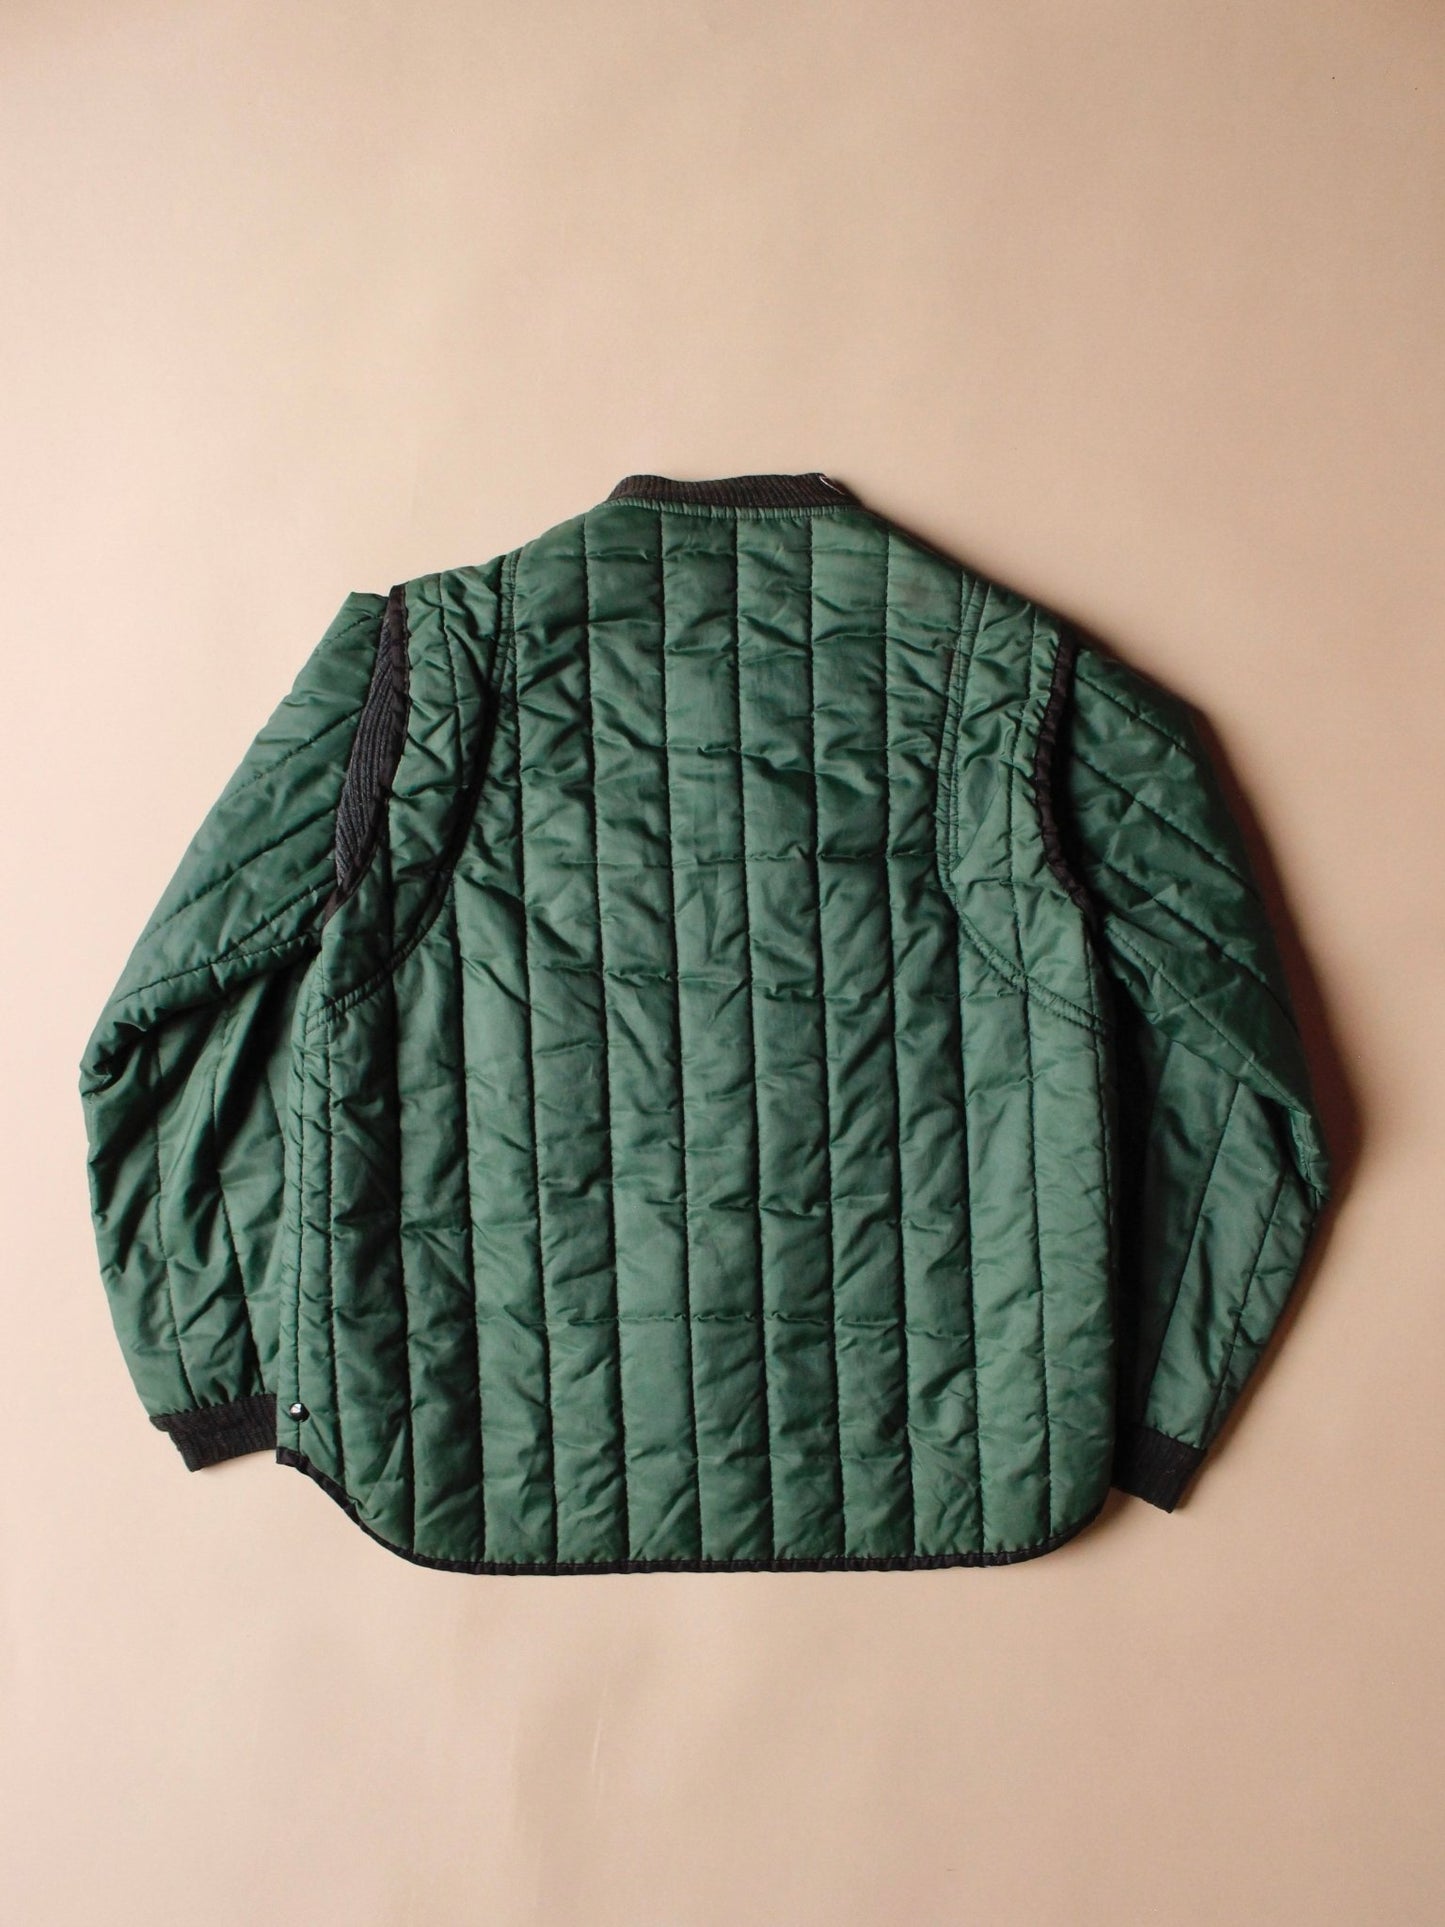 1960s-70s insulated Jacket Liner